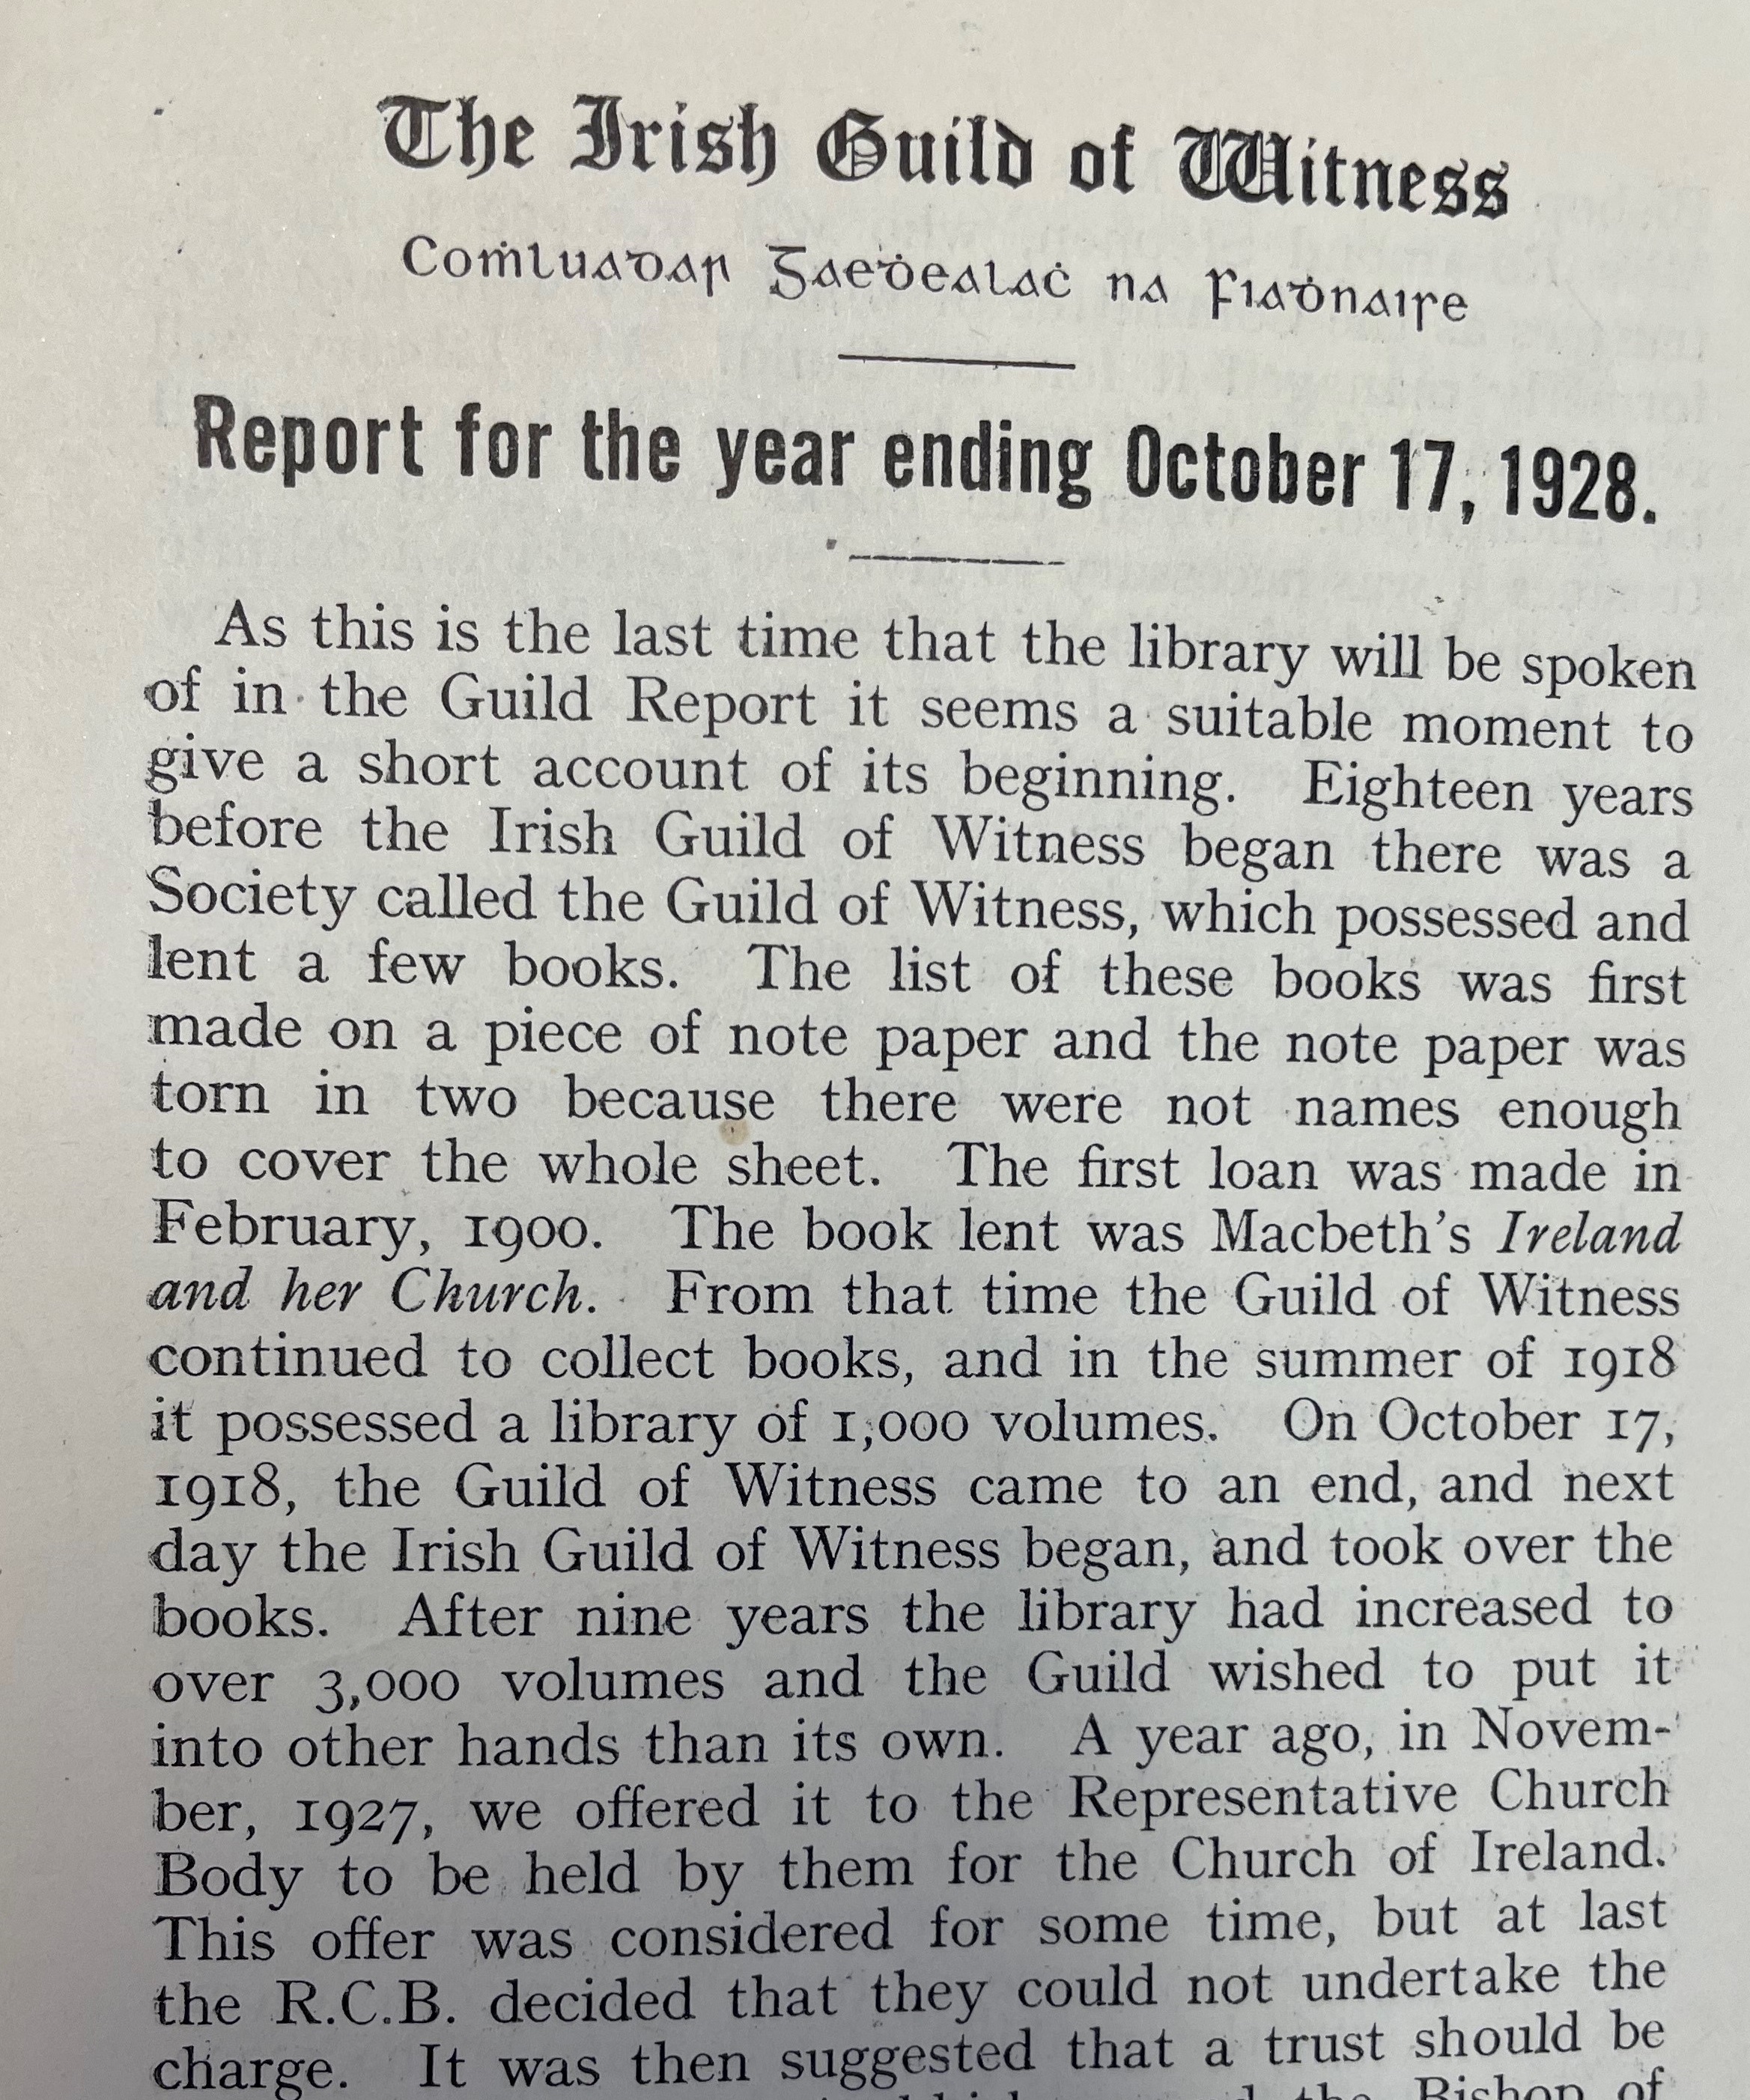 Irish Guild of Witness Annual Report, 1928, RCB Library Ms 89